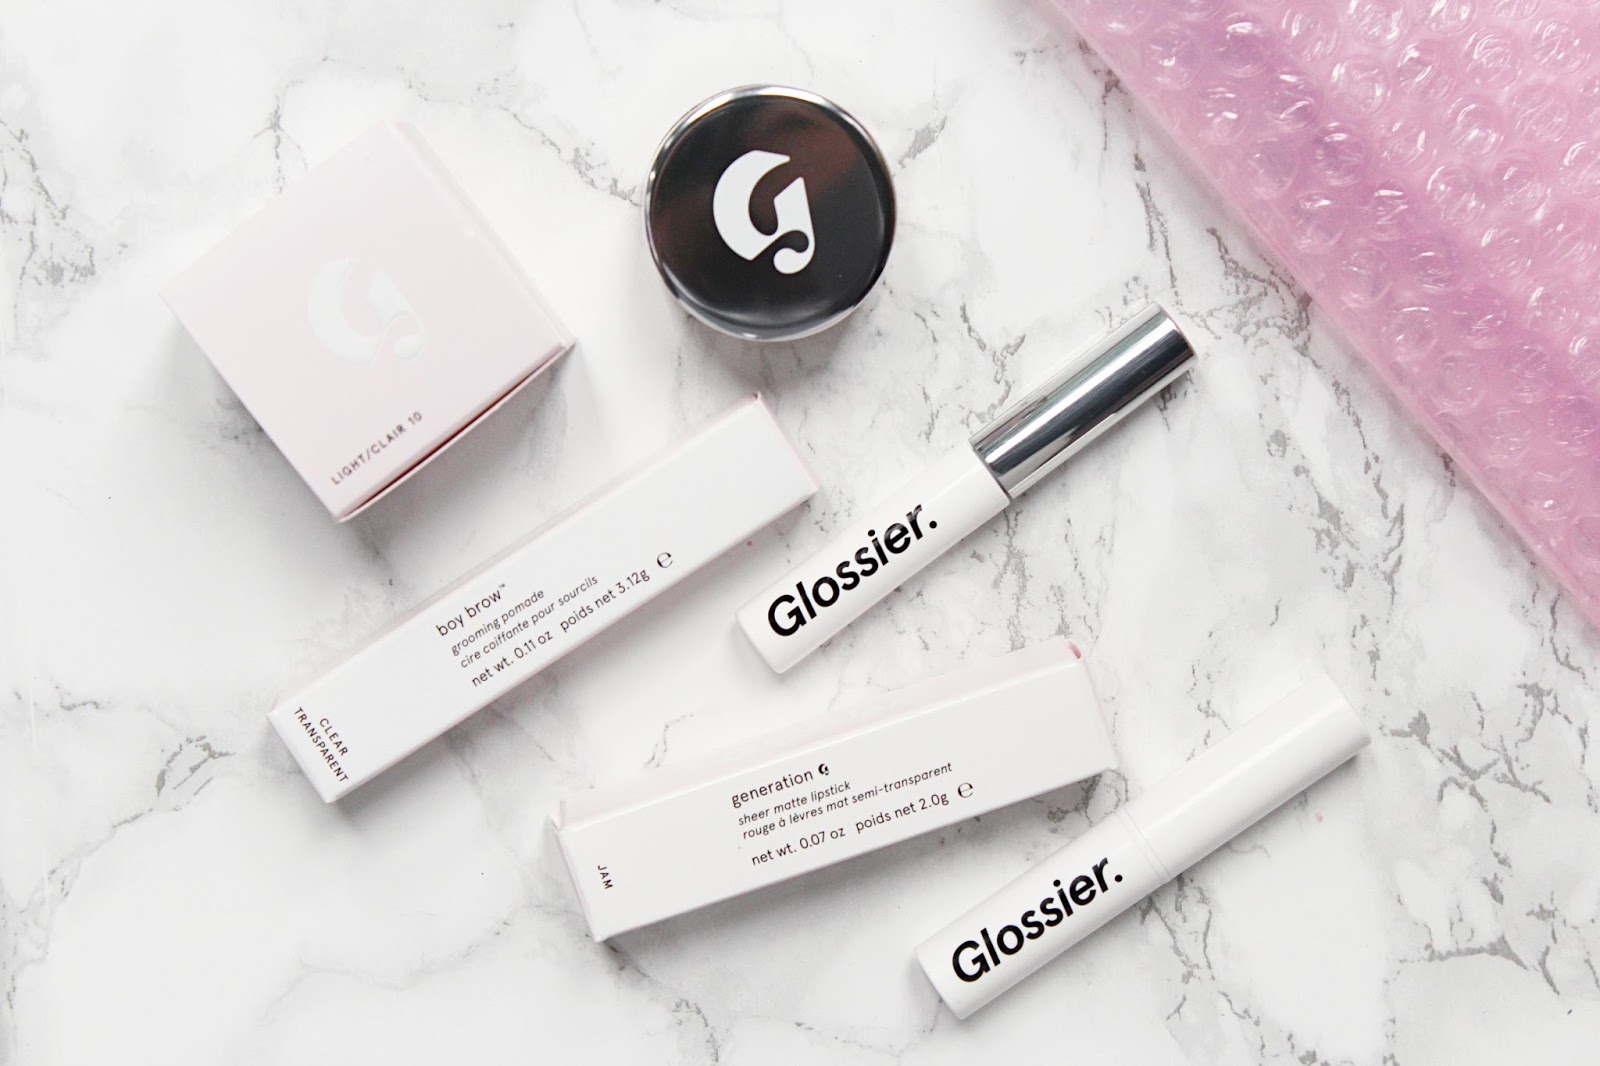 Glossier Phase 2 Set Review